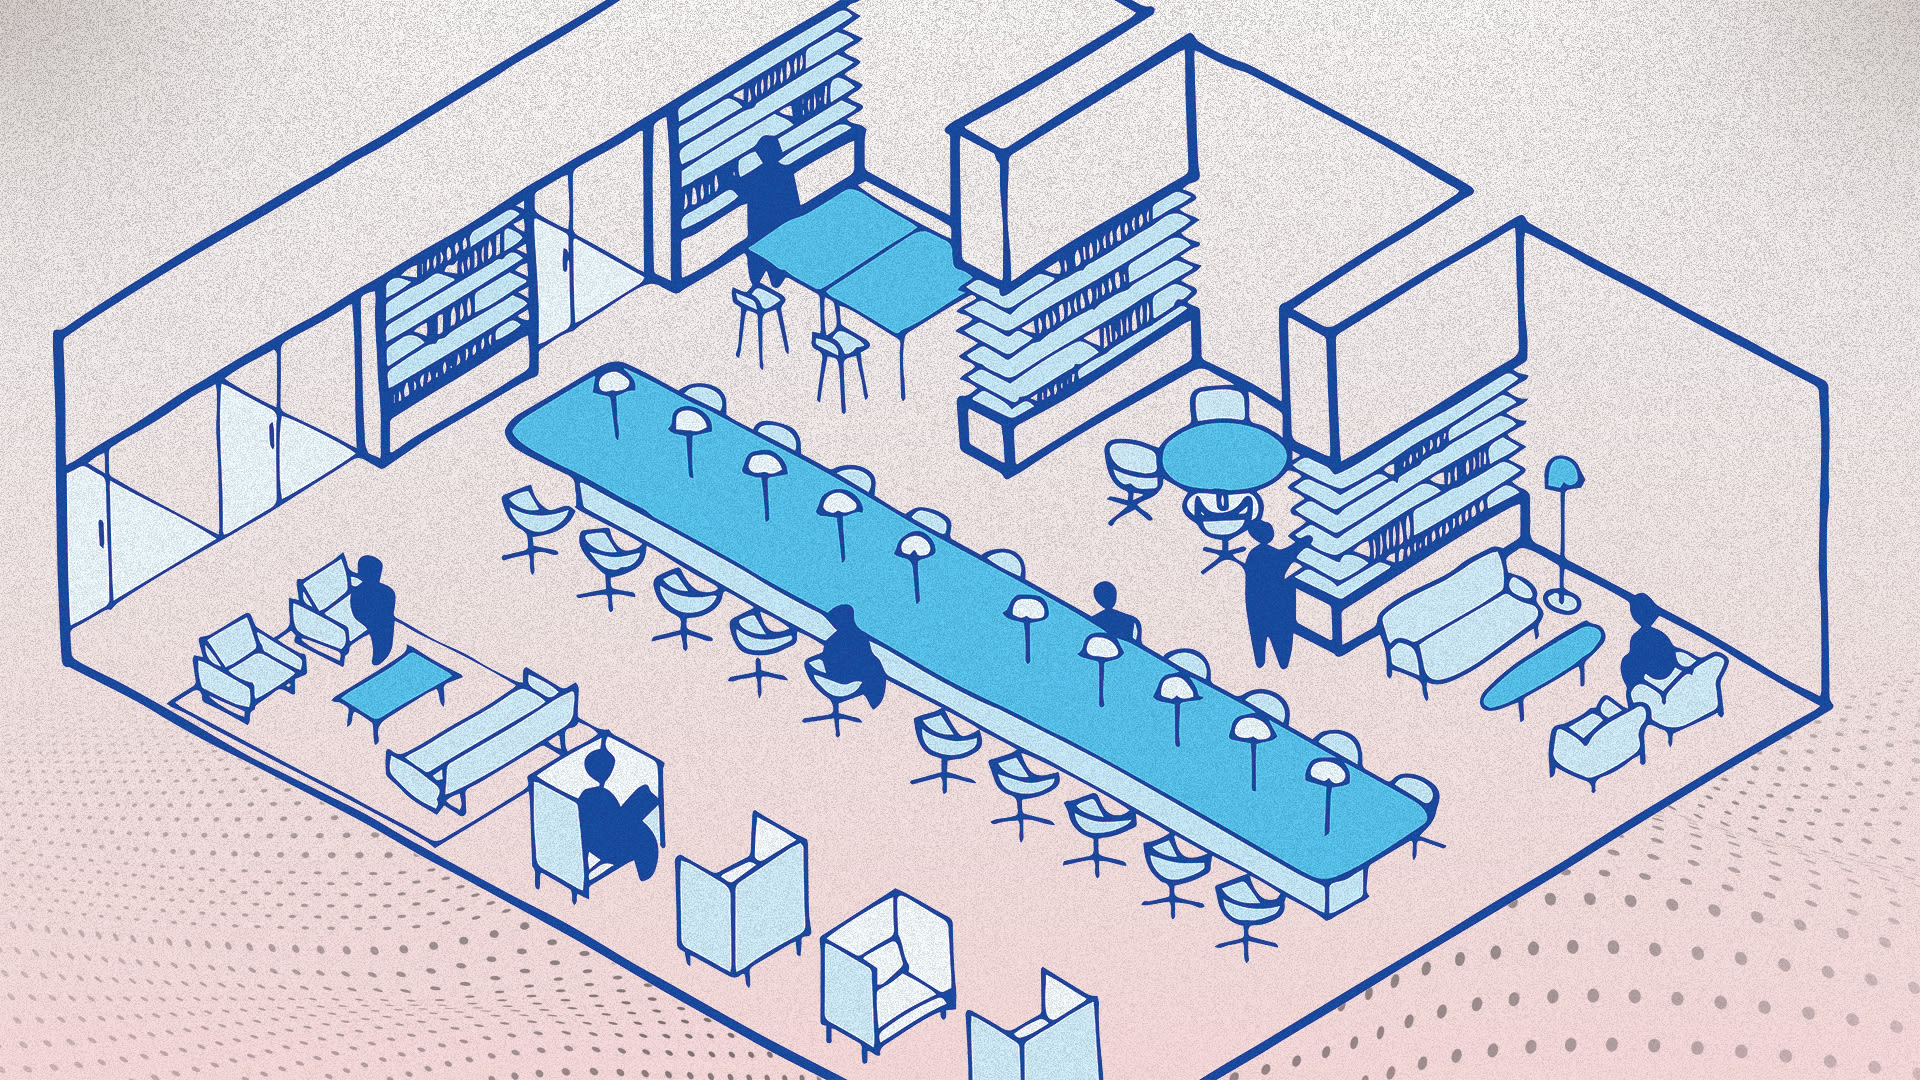 These architects popularized the open office. Now they say ‘the open office is dead’